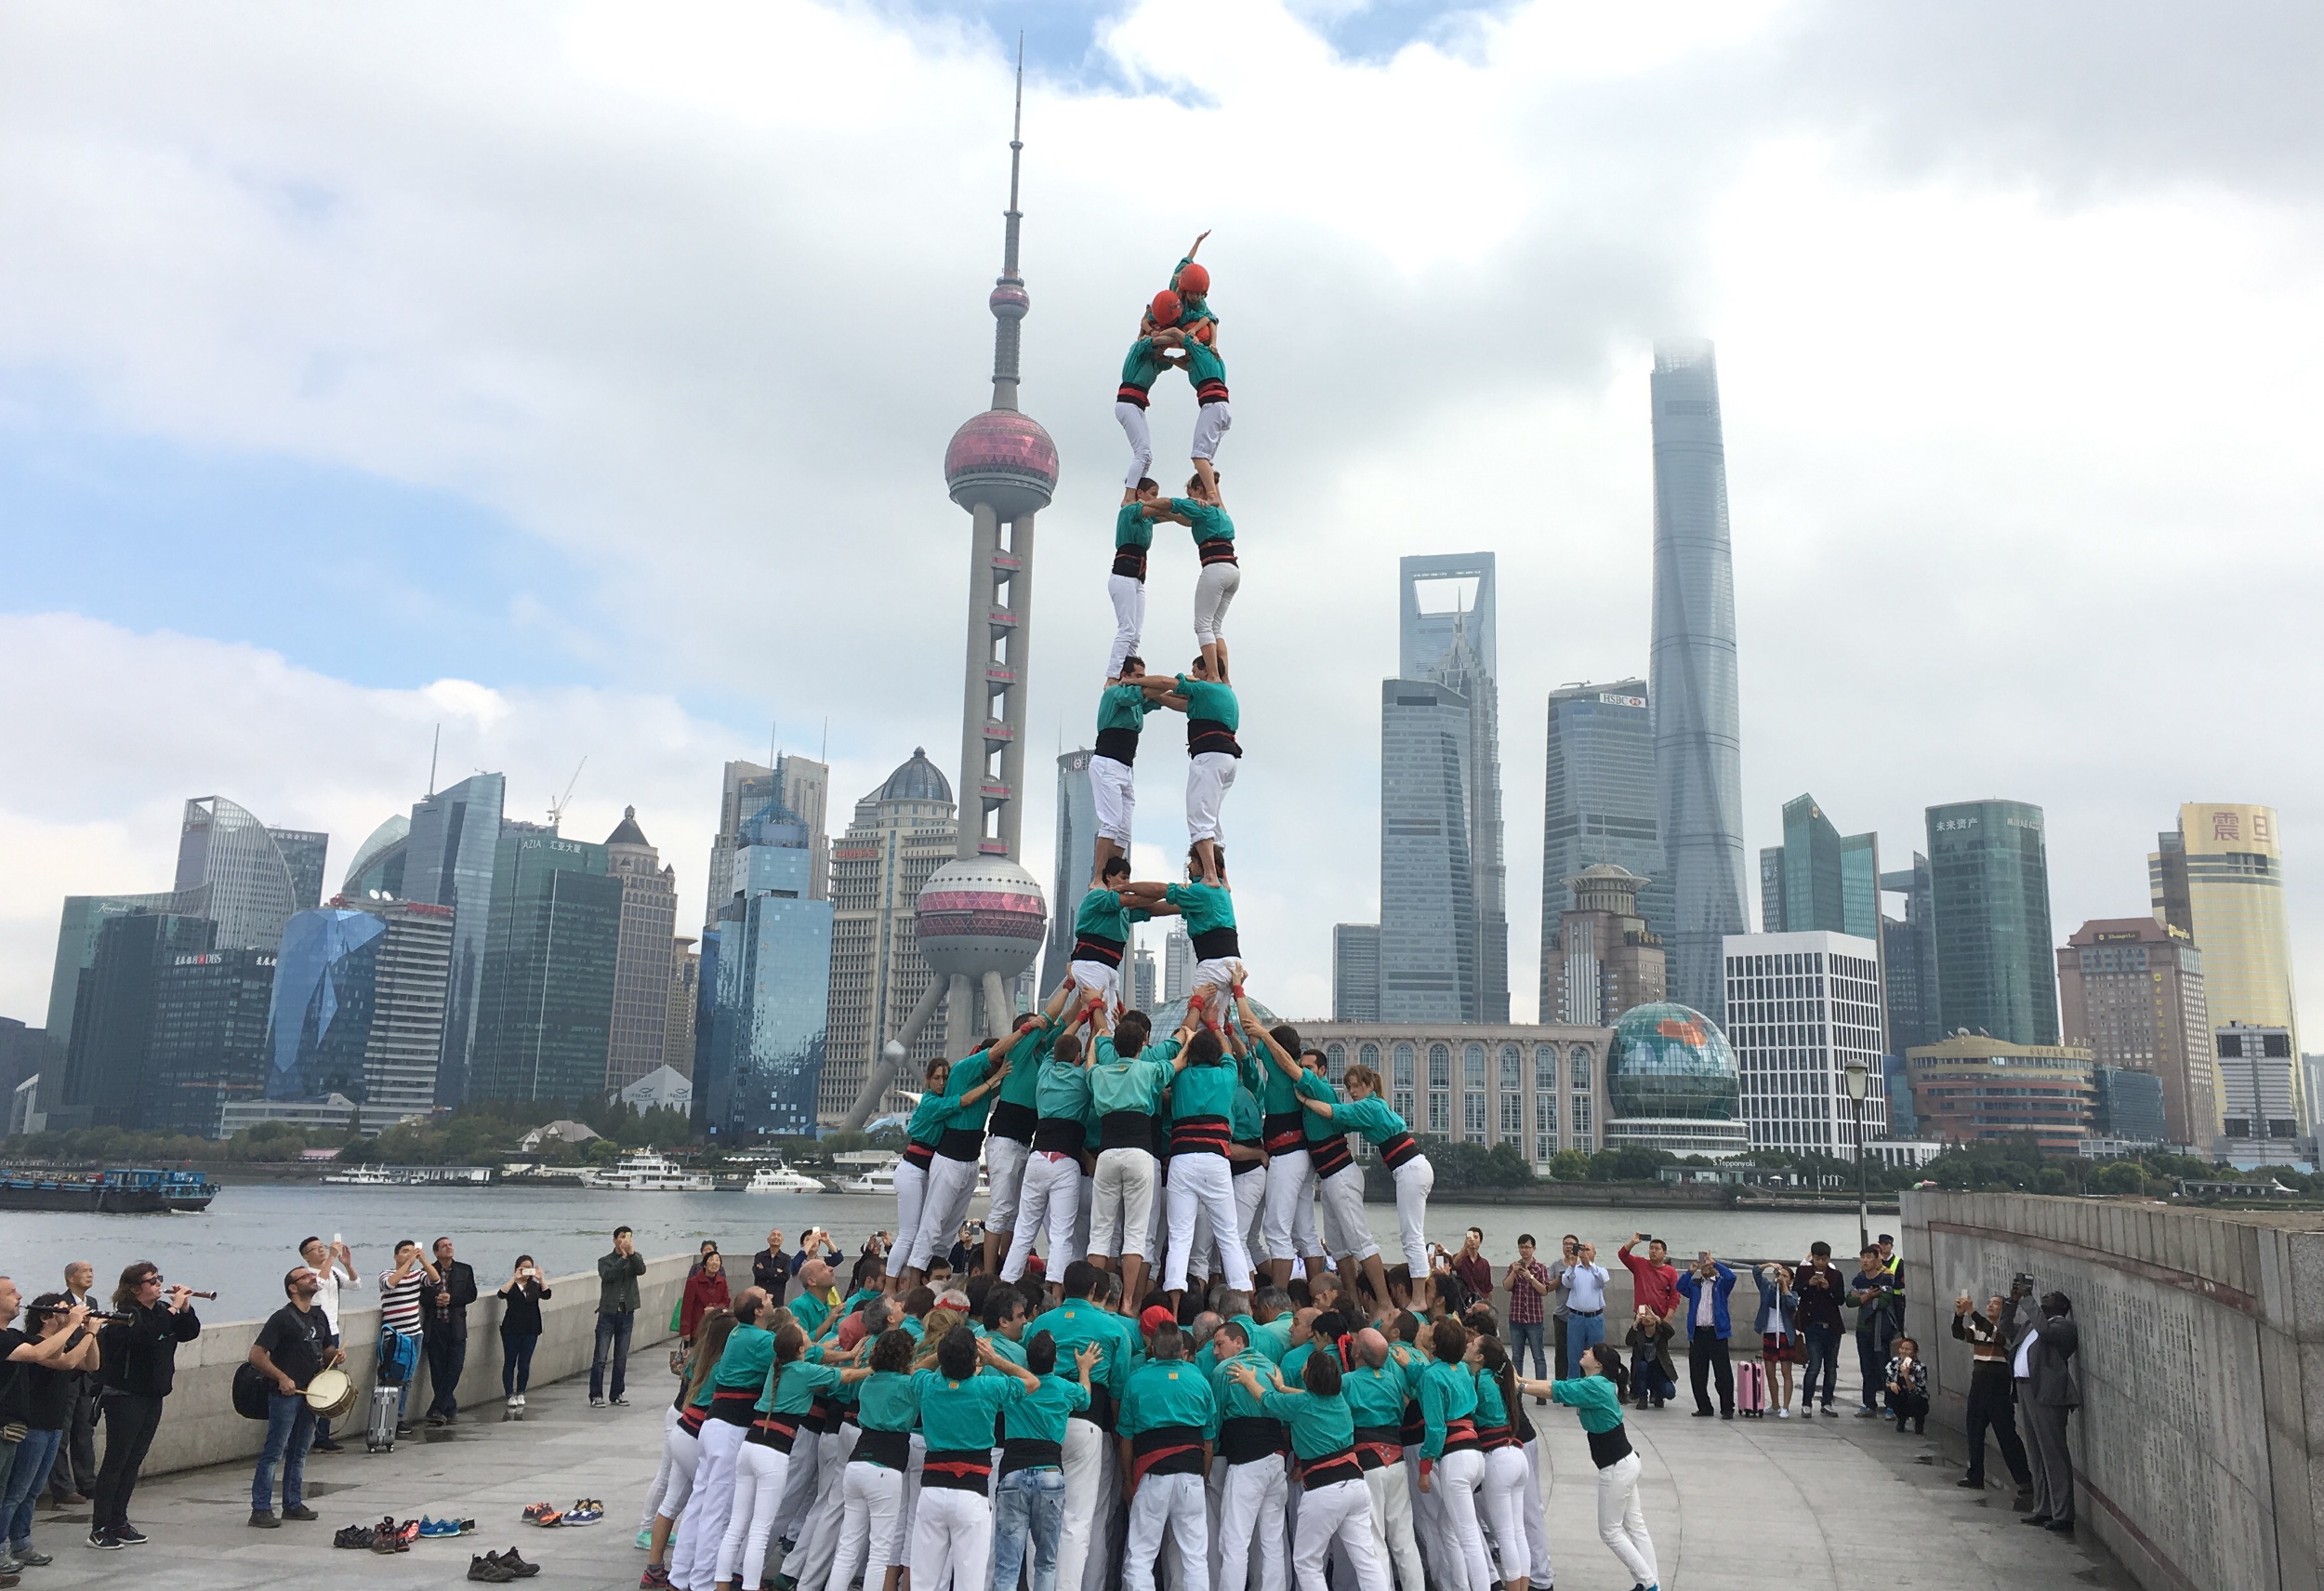 'Castellers de Vilafranca' performed several towers in various Shanghai's iconic spots (by ACN)